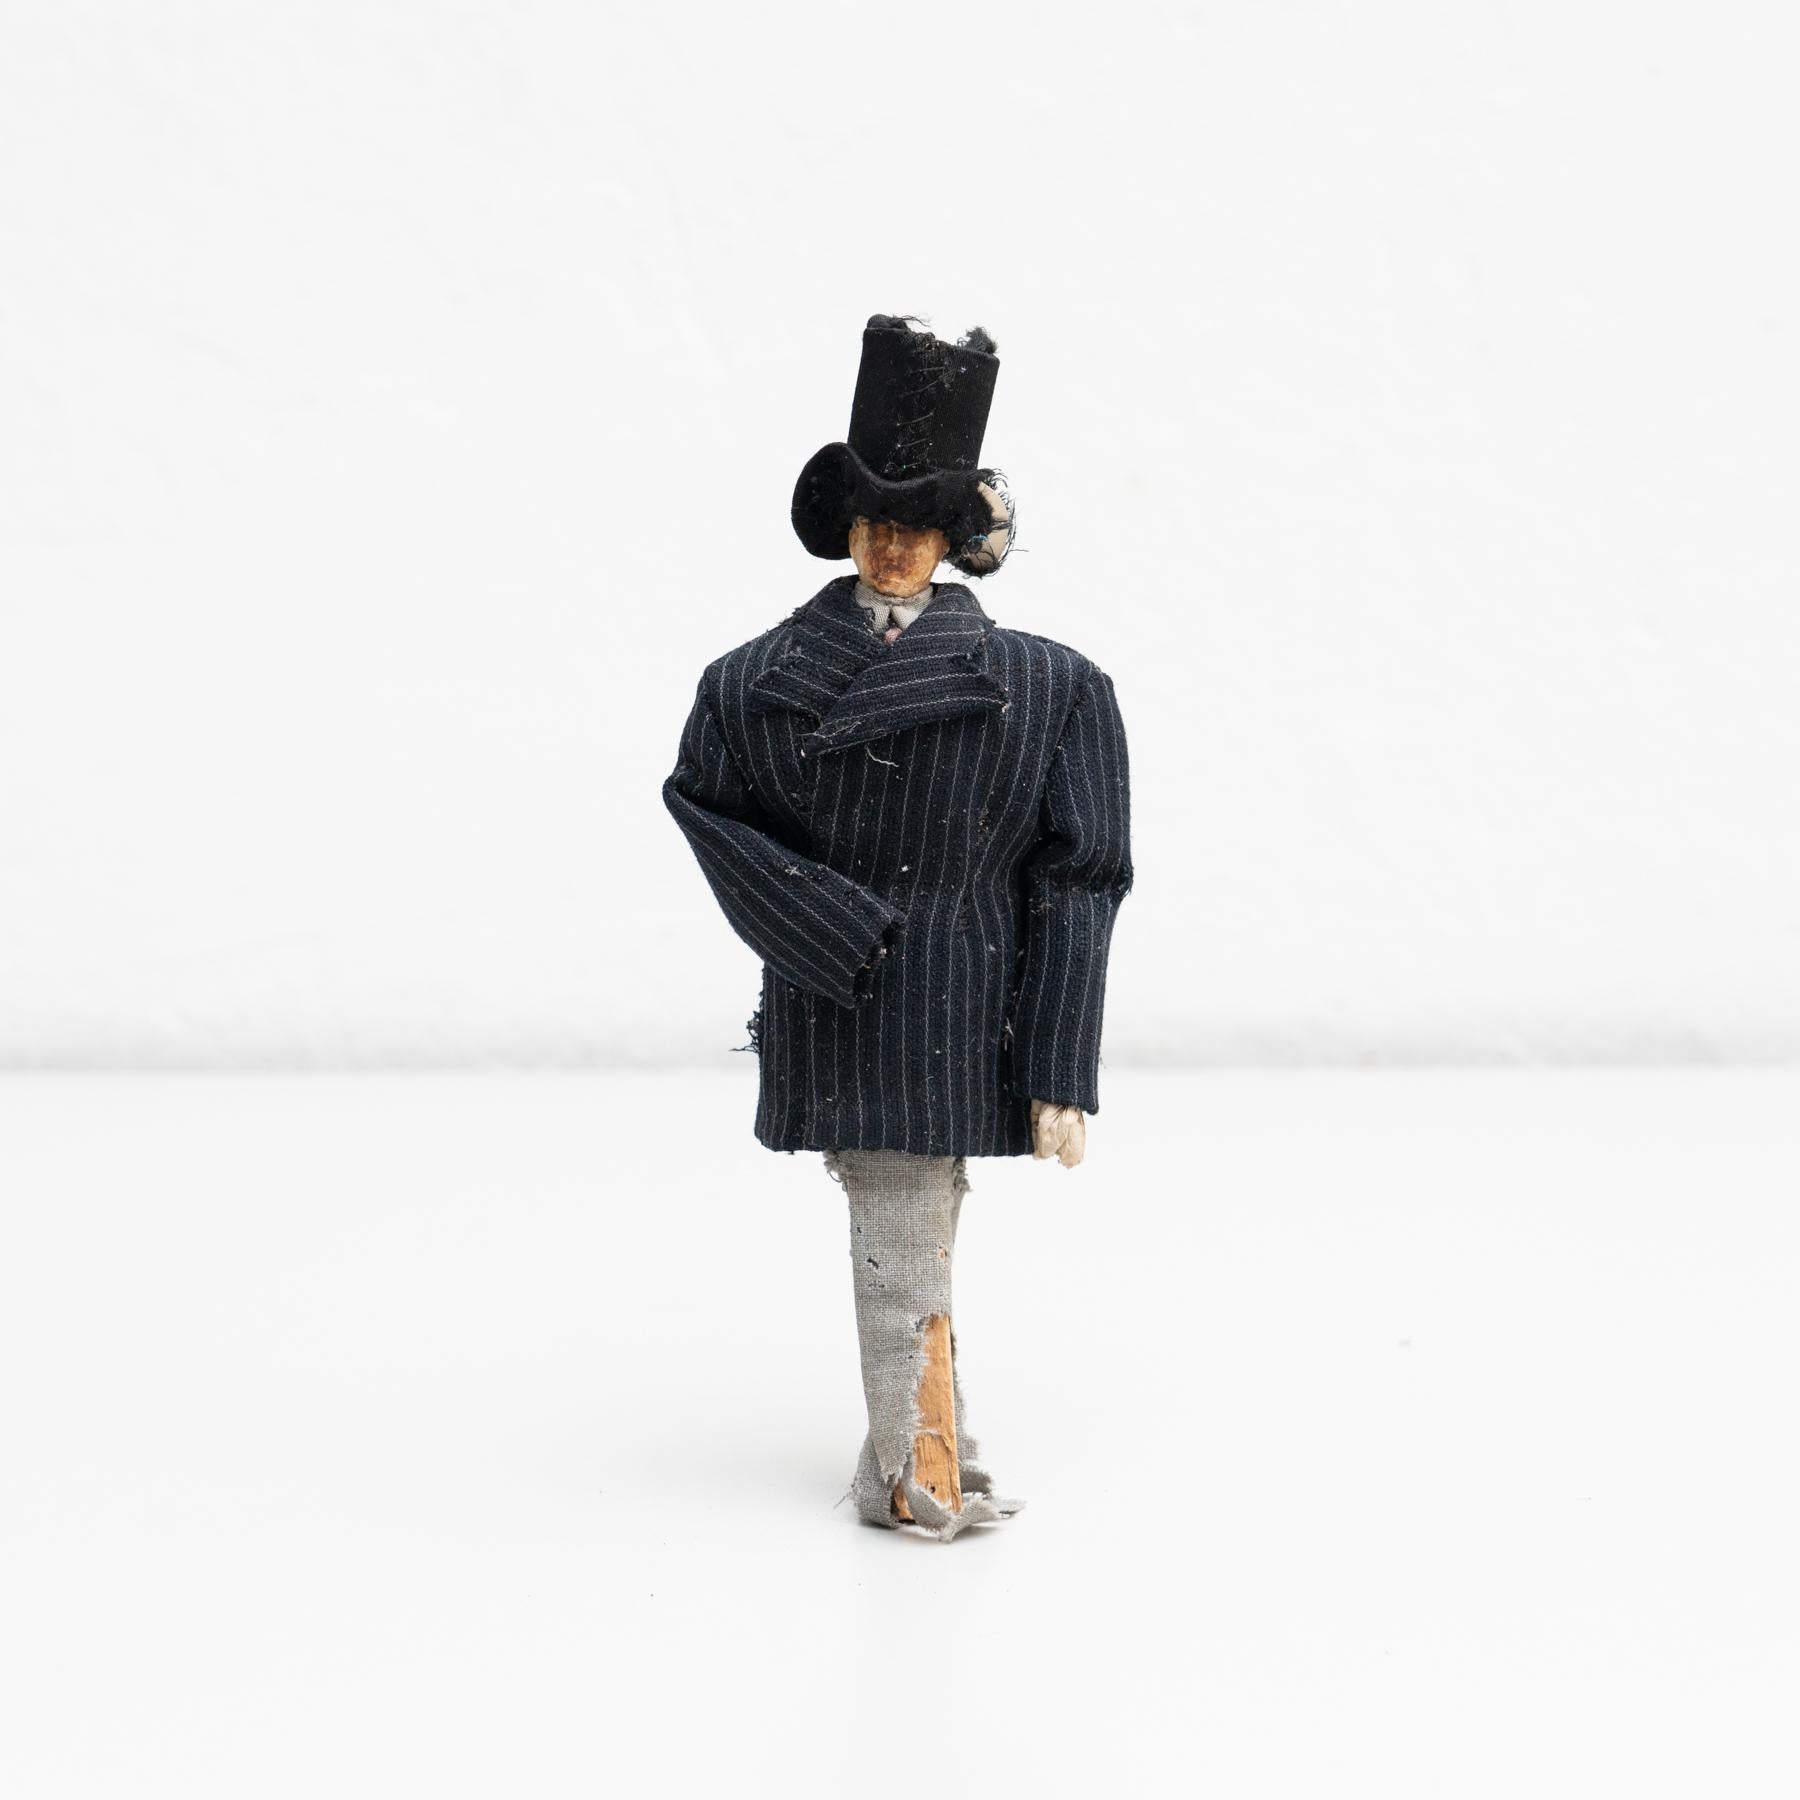 Antique early 20th century hand painted rag doll of man wearing a top hat. 

Manufactured circa 1920 in Spain.

In original condition, with minor wear consistent with age and use, preserving a beautiful